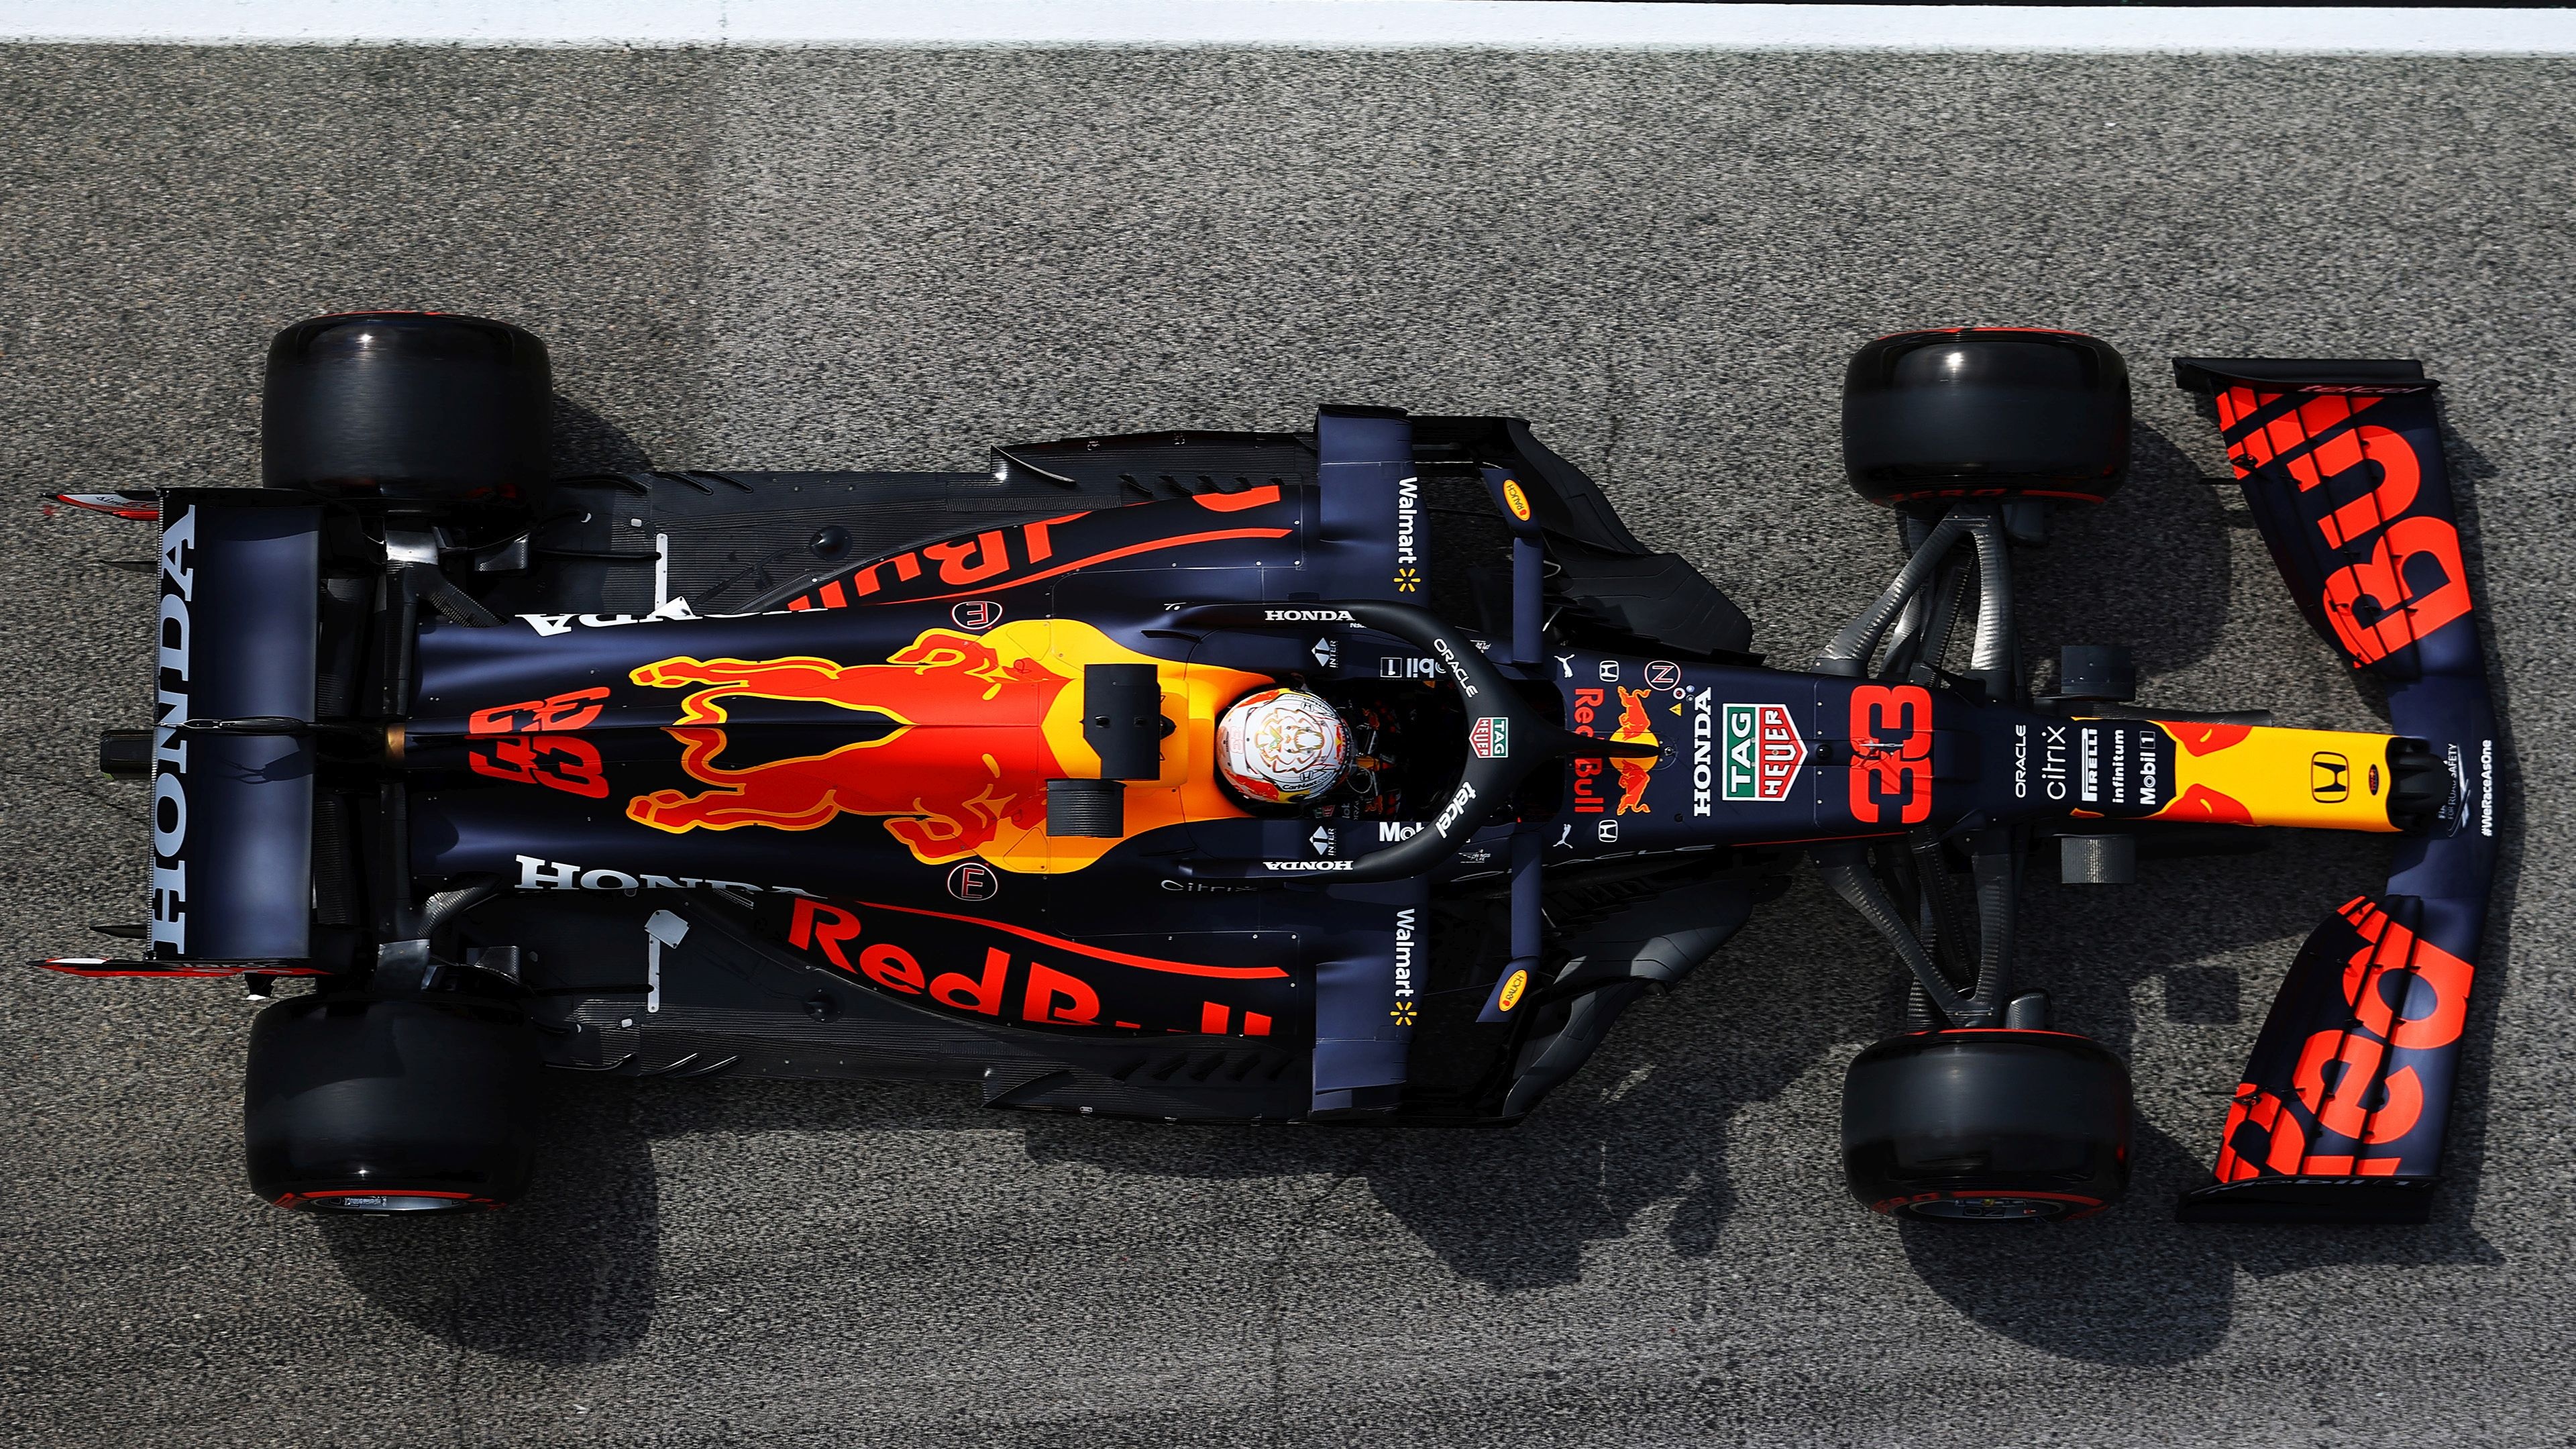 Motorsports: Max Verstappen drives The Oracle Red Bull Racing RB16, The Formula One racing team. 3840x2160 4K Wallpaper.